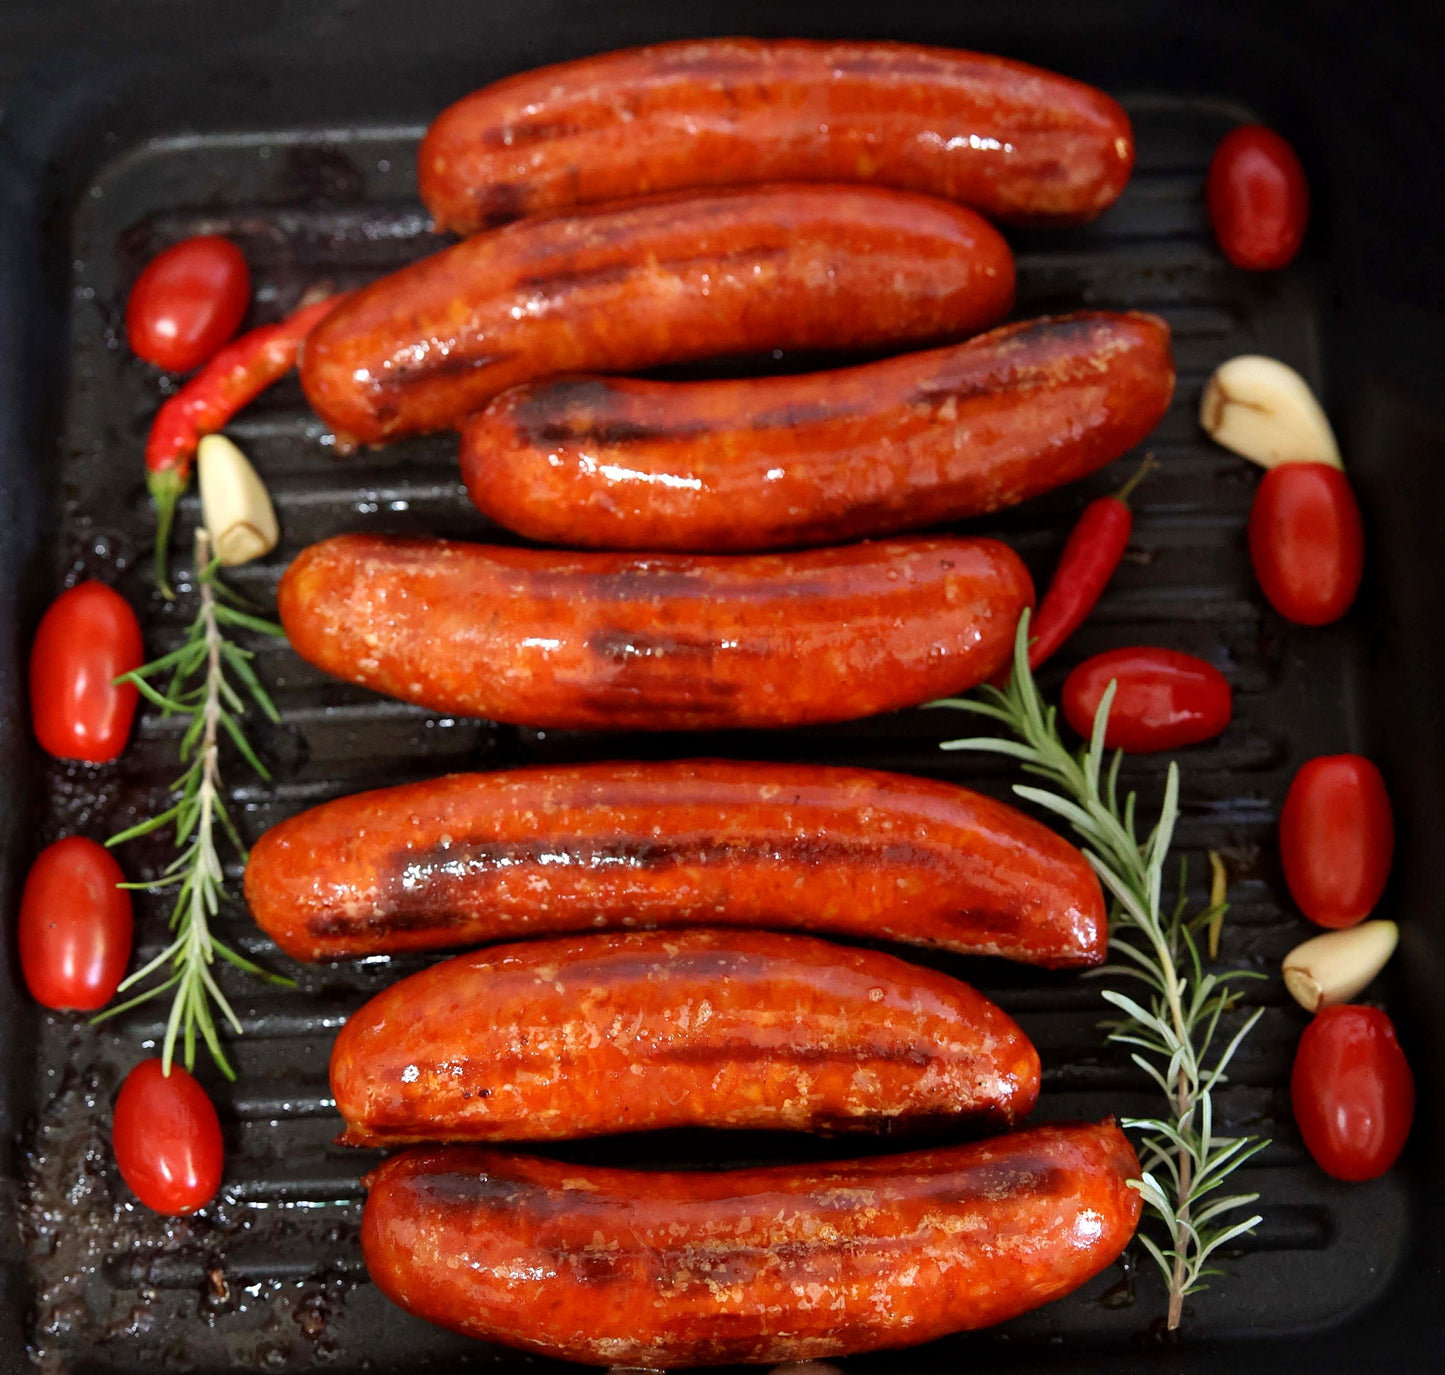 Smoked Chorizo 4 piece pack random weight approx 400g packet. Regular price $10.00 AUD [You are guaranteed to receive at least 390g of product, equivalent price of $25.64 per kg.]